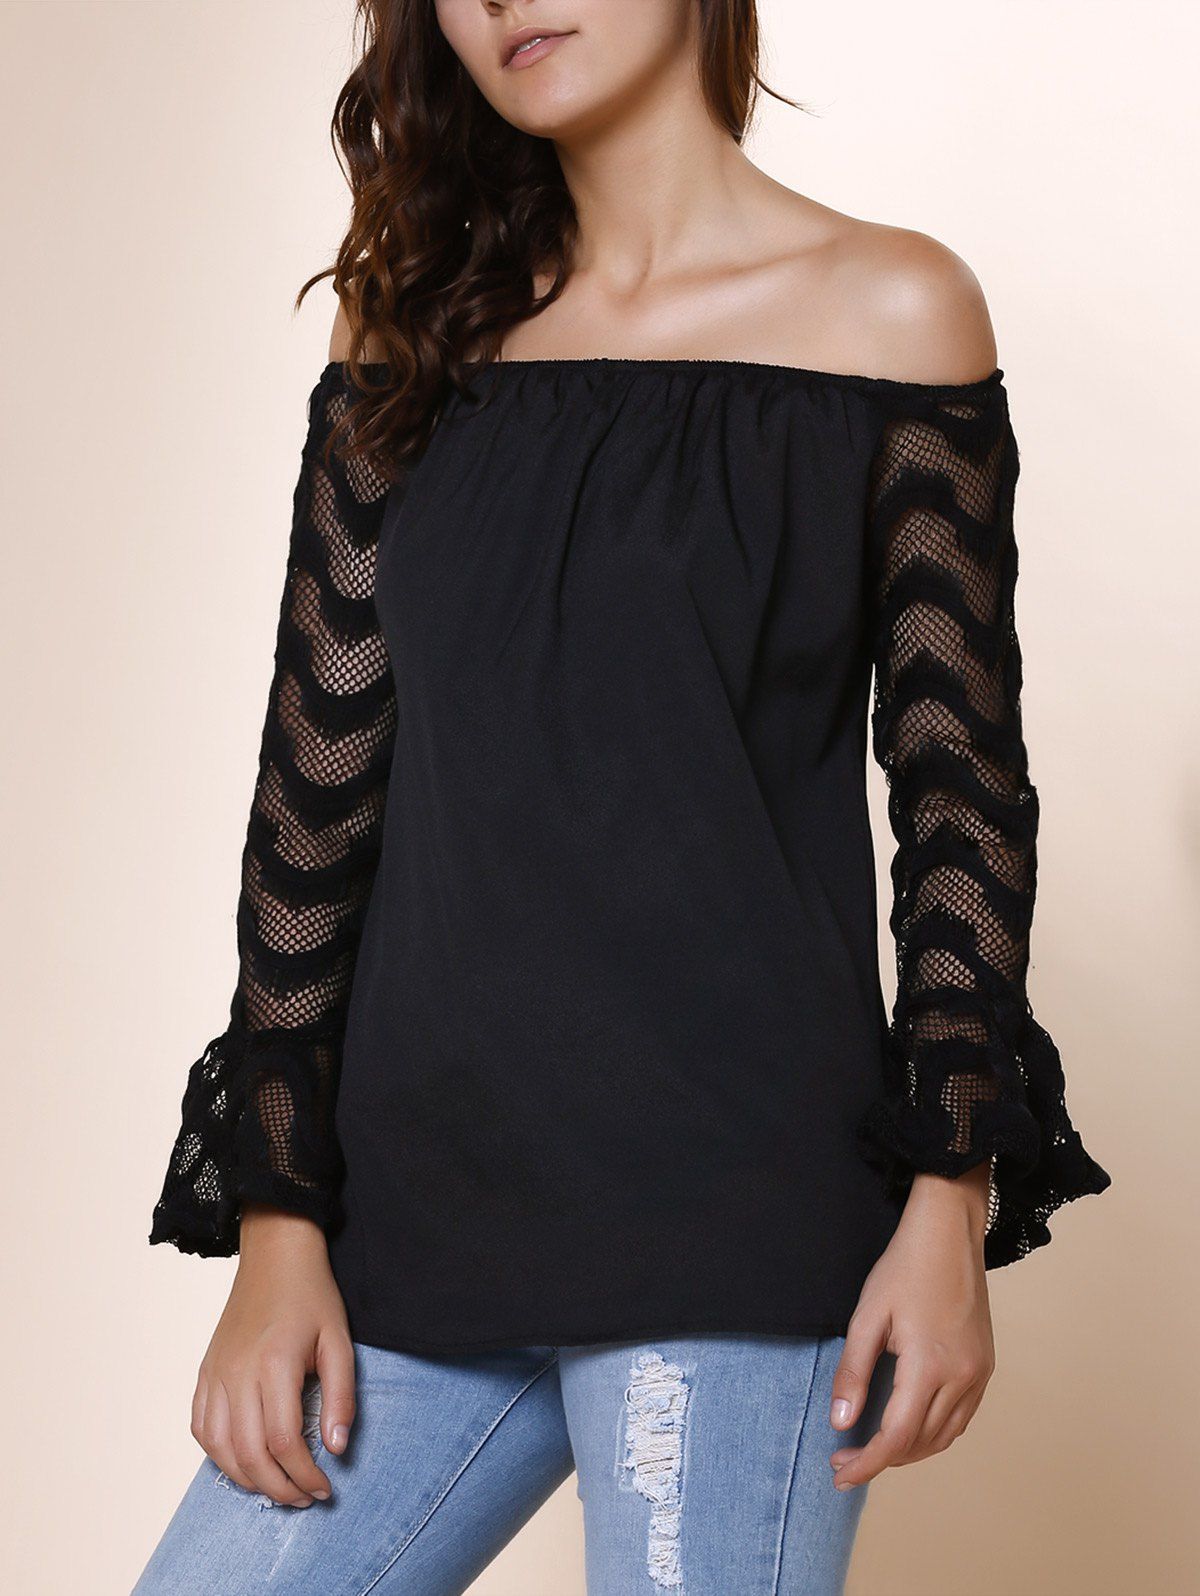 [34% OFF] Fashionable Off-The-Shoulder Lace Spliced Sleeve Black T ...